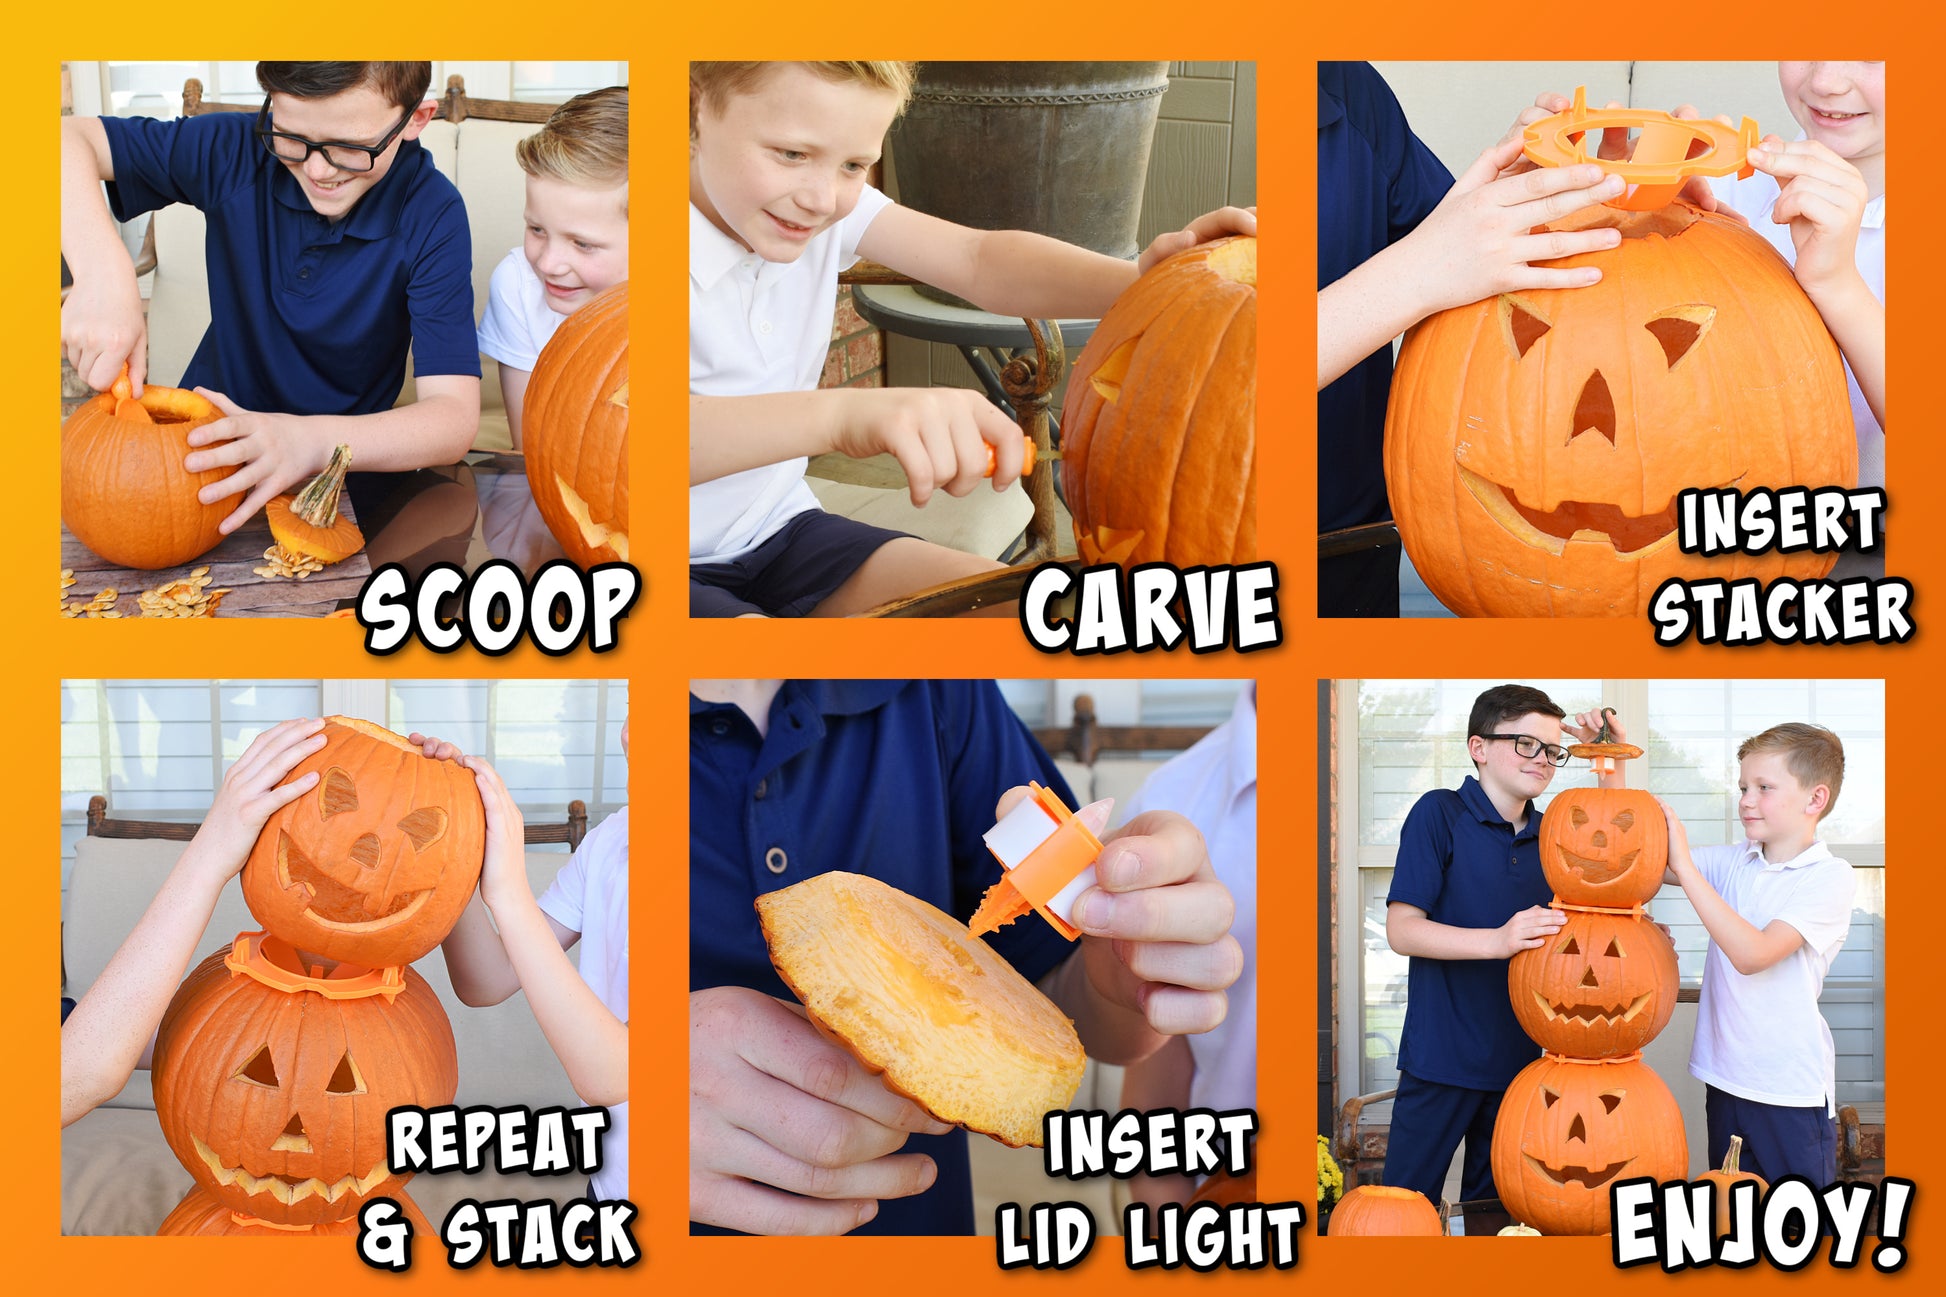 A collage of 6 images depicting how to use the product "Stack O Lantern". 